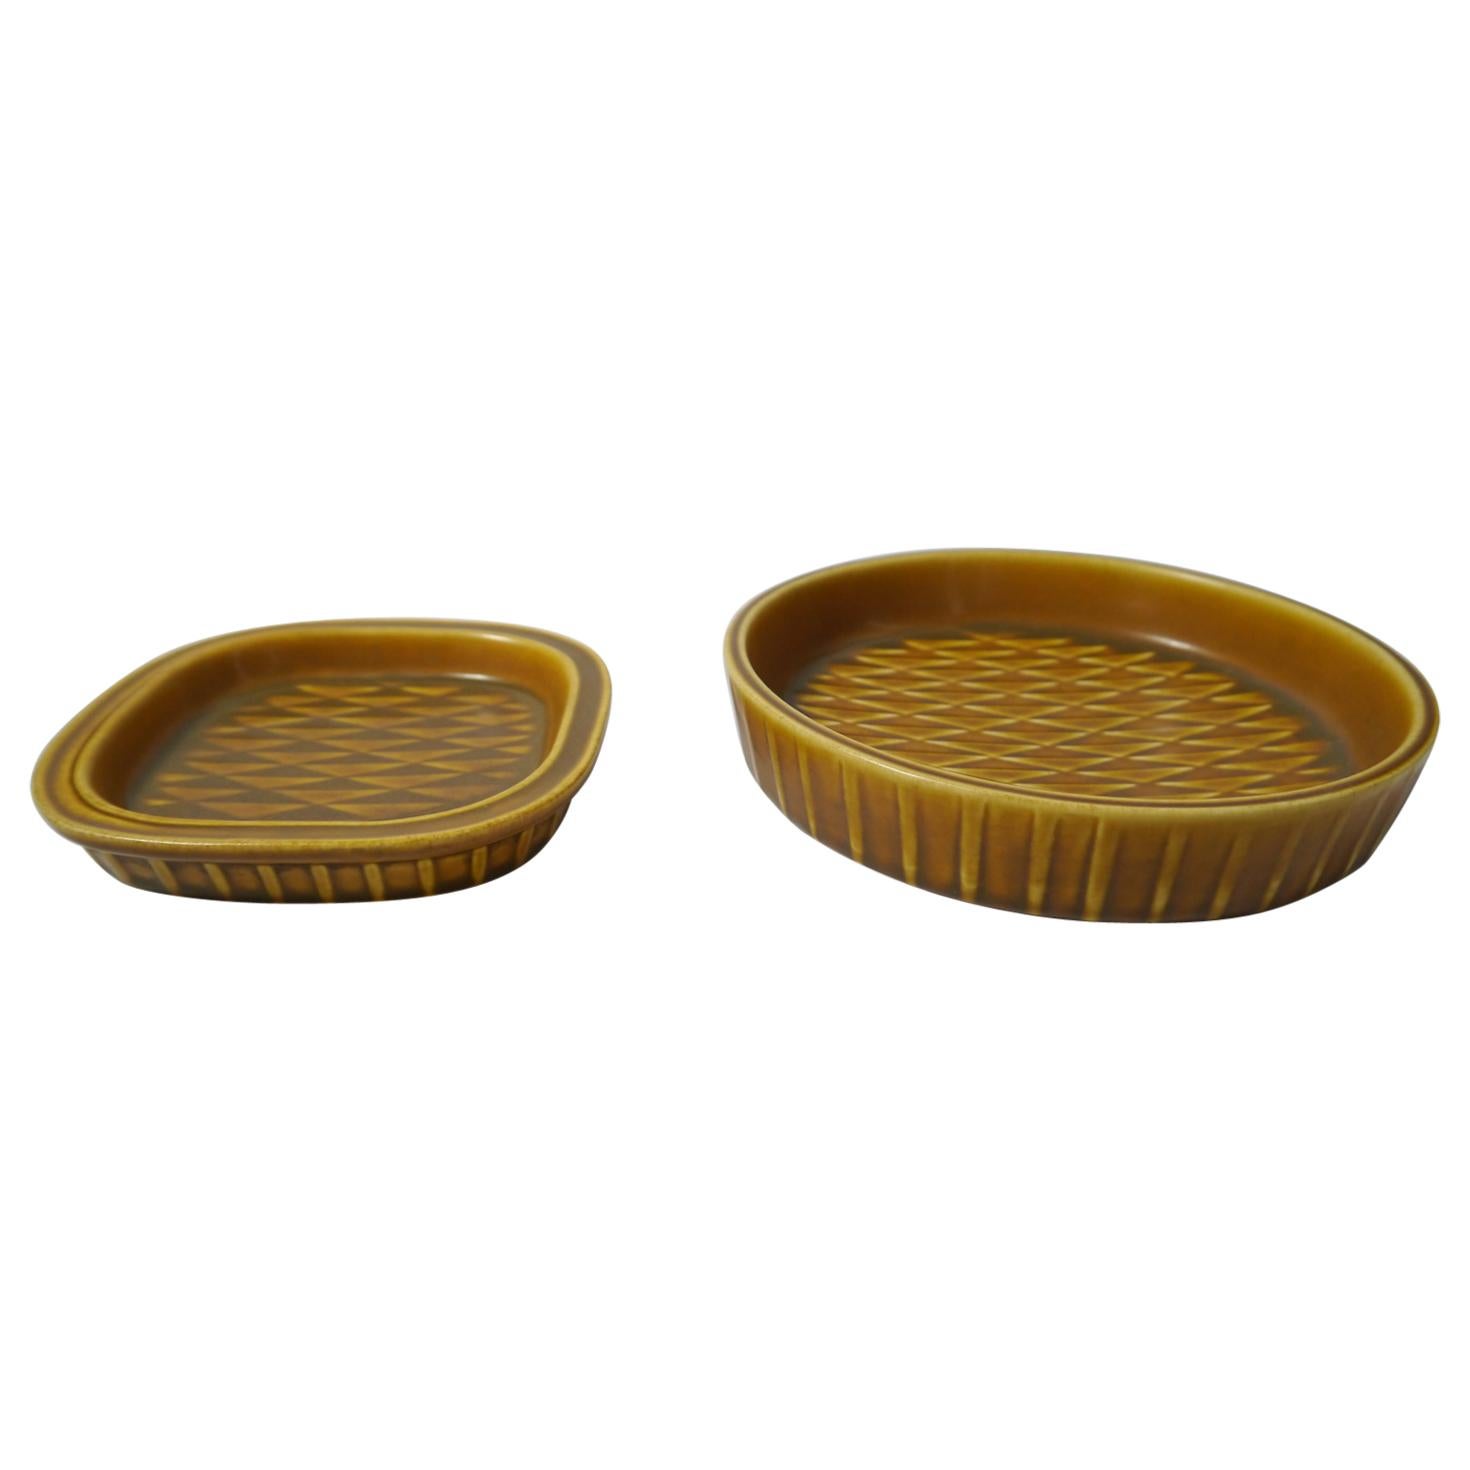 Two Mustard Yellow Ceramic Plates by Gunnar Nylund for Rörstrand, Sweden, 1950s